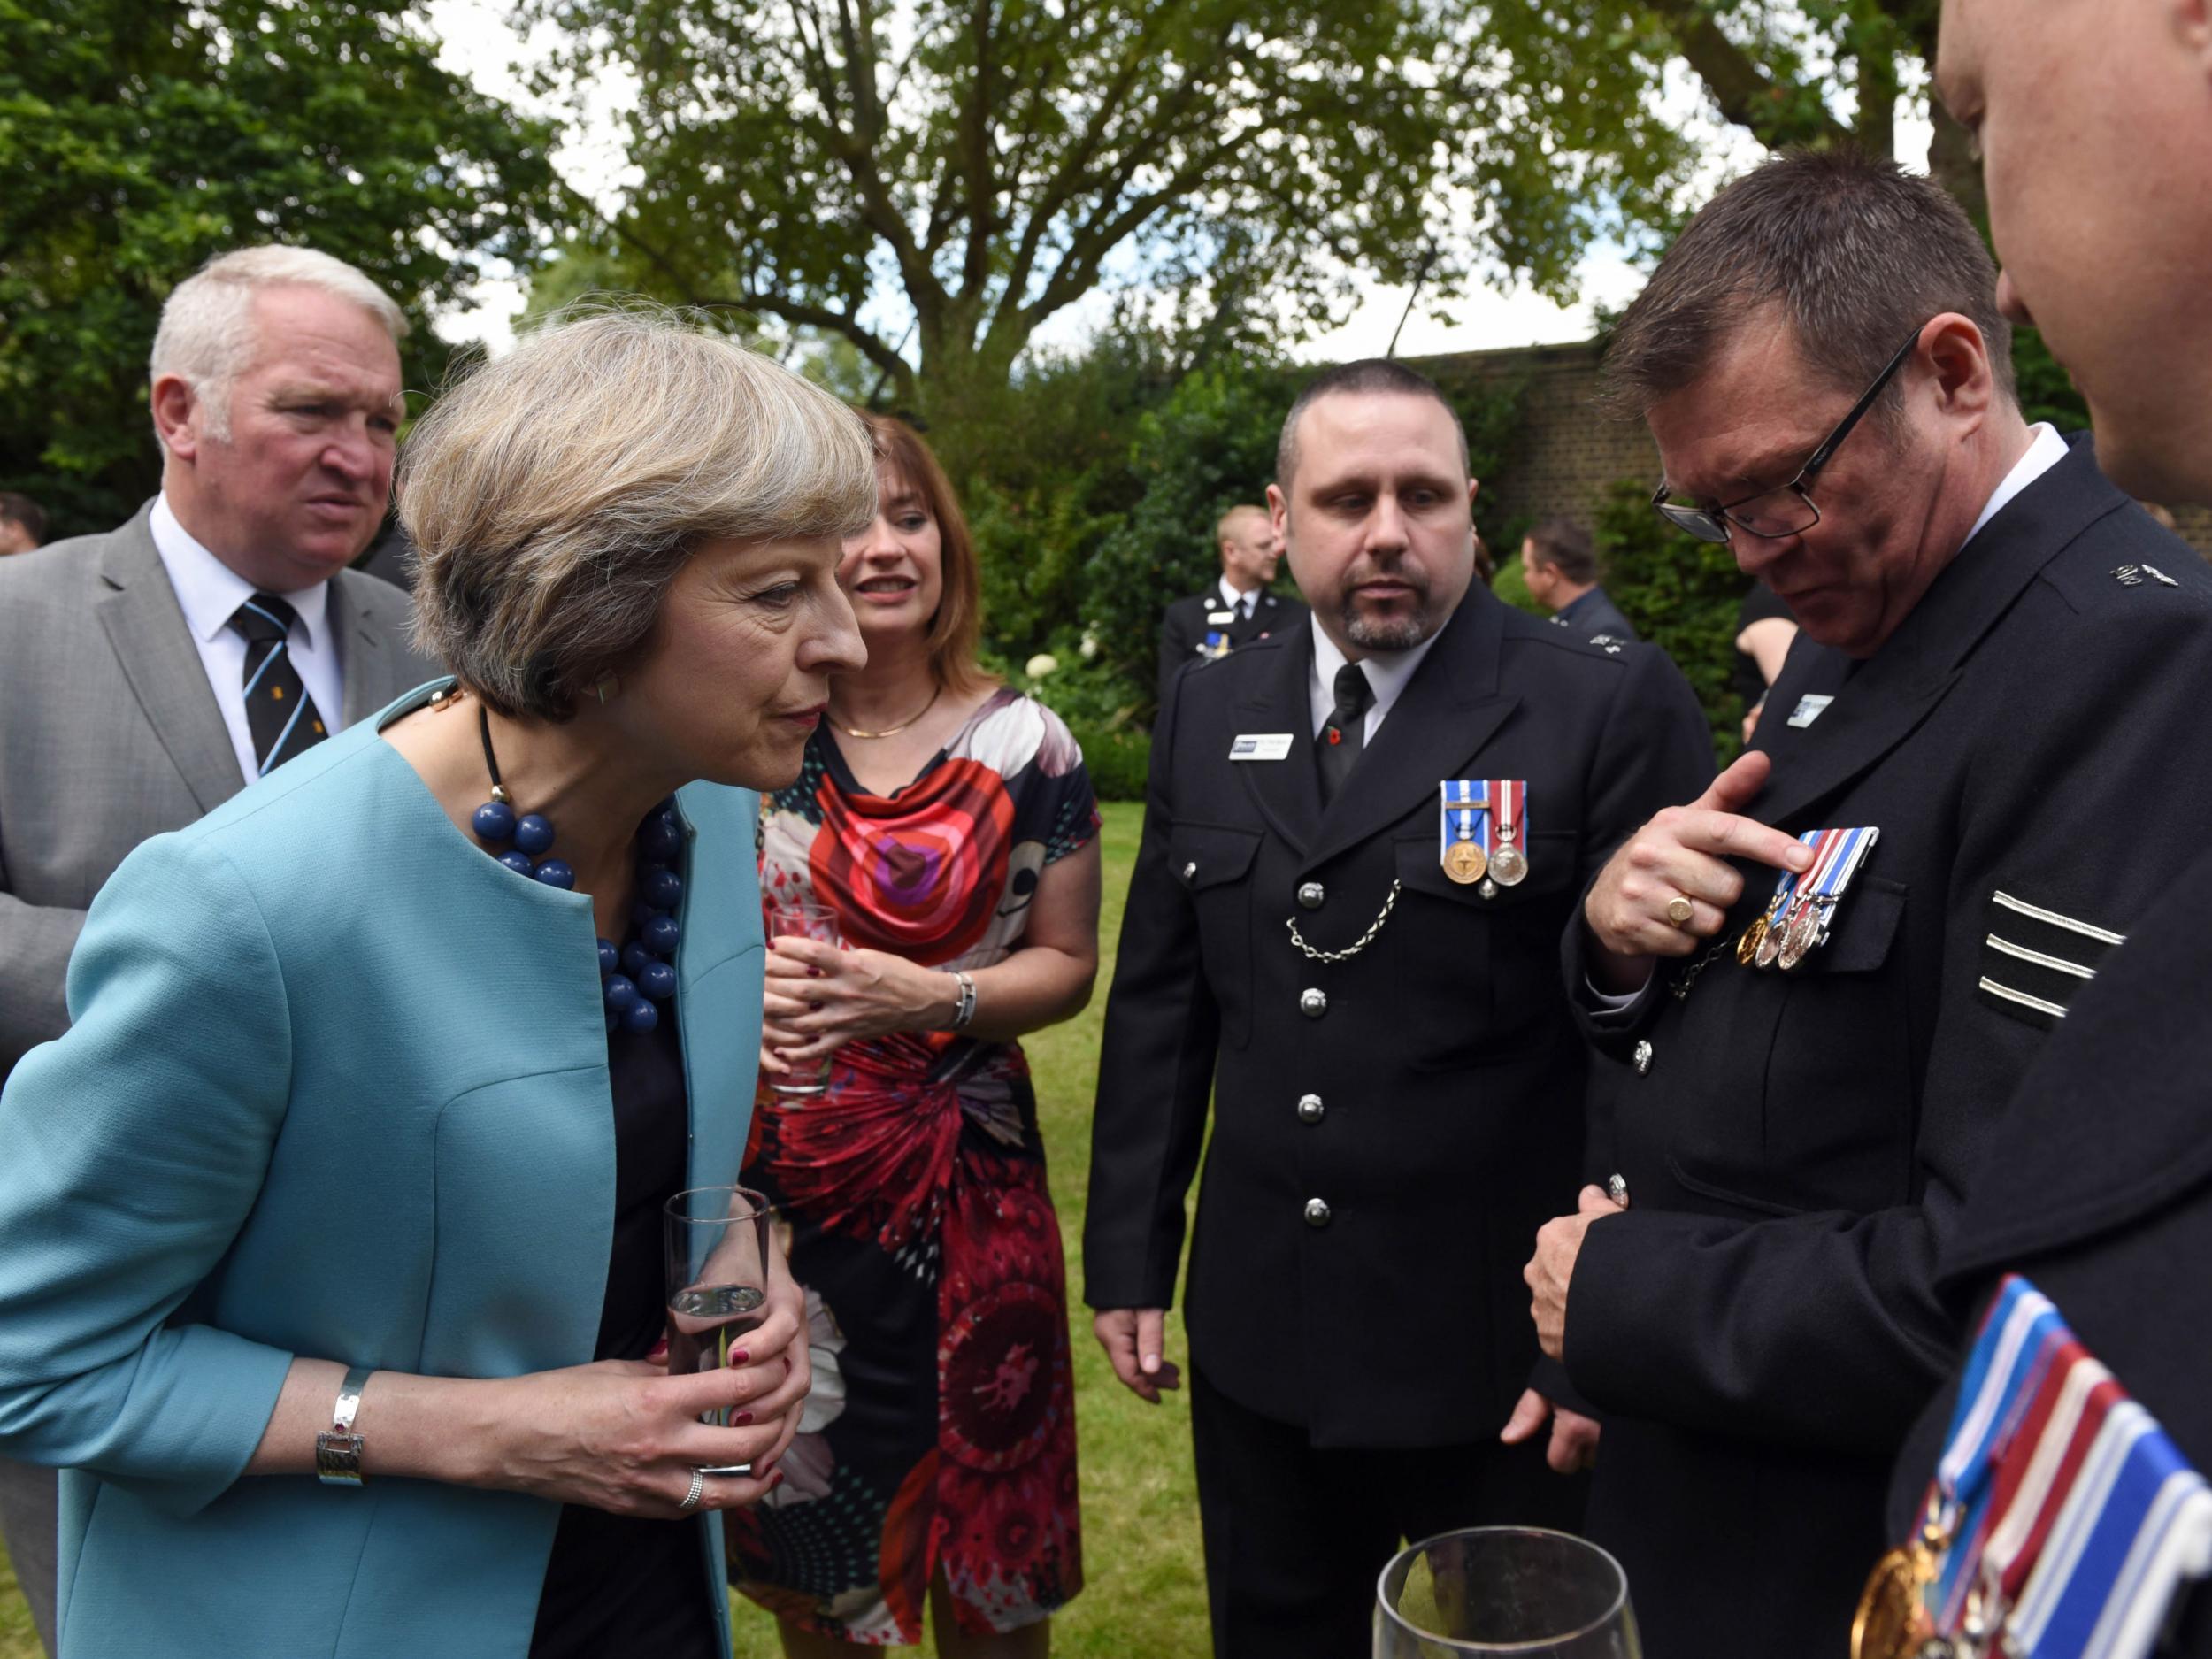 Relations between the police and Home Secretary have been strained, but one of Theresa May's first appointments as Prime Minister was to host the reception for police bravery awards